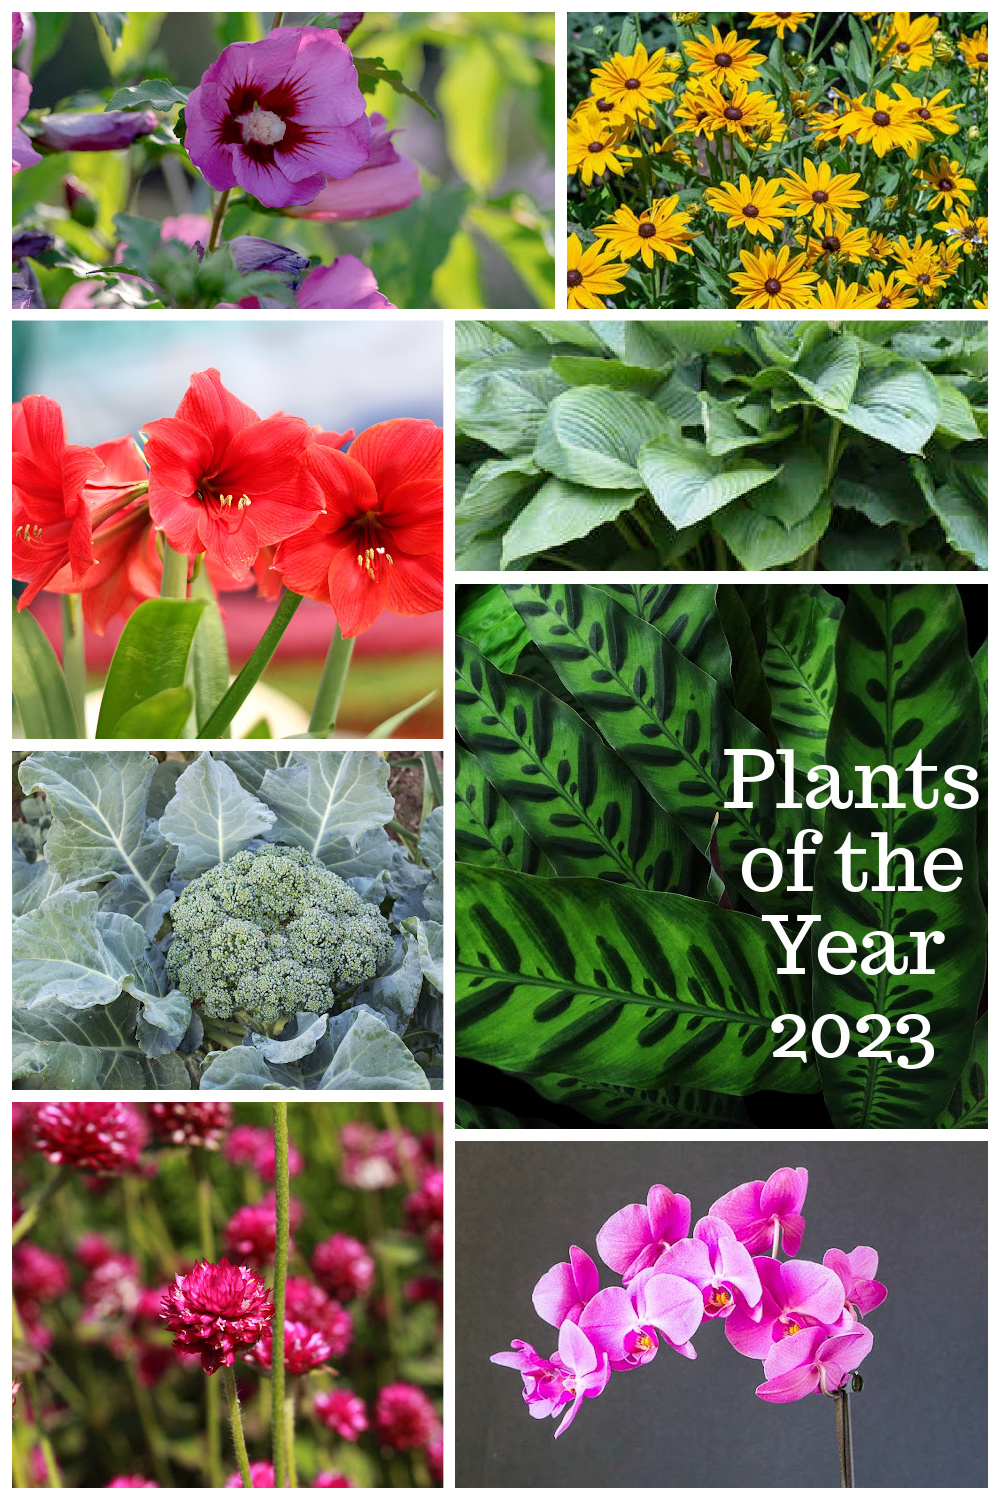 Collage of plants of the year for 2023 including Rose of Sharon, Black Eyed Susan, Amaryllis, hosta, broccoli, orchid, globe amaranth and rattlesnake plant.